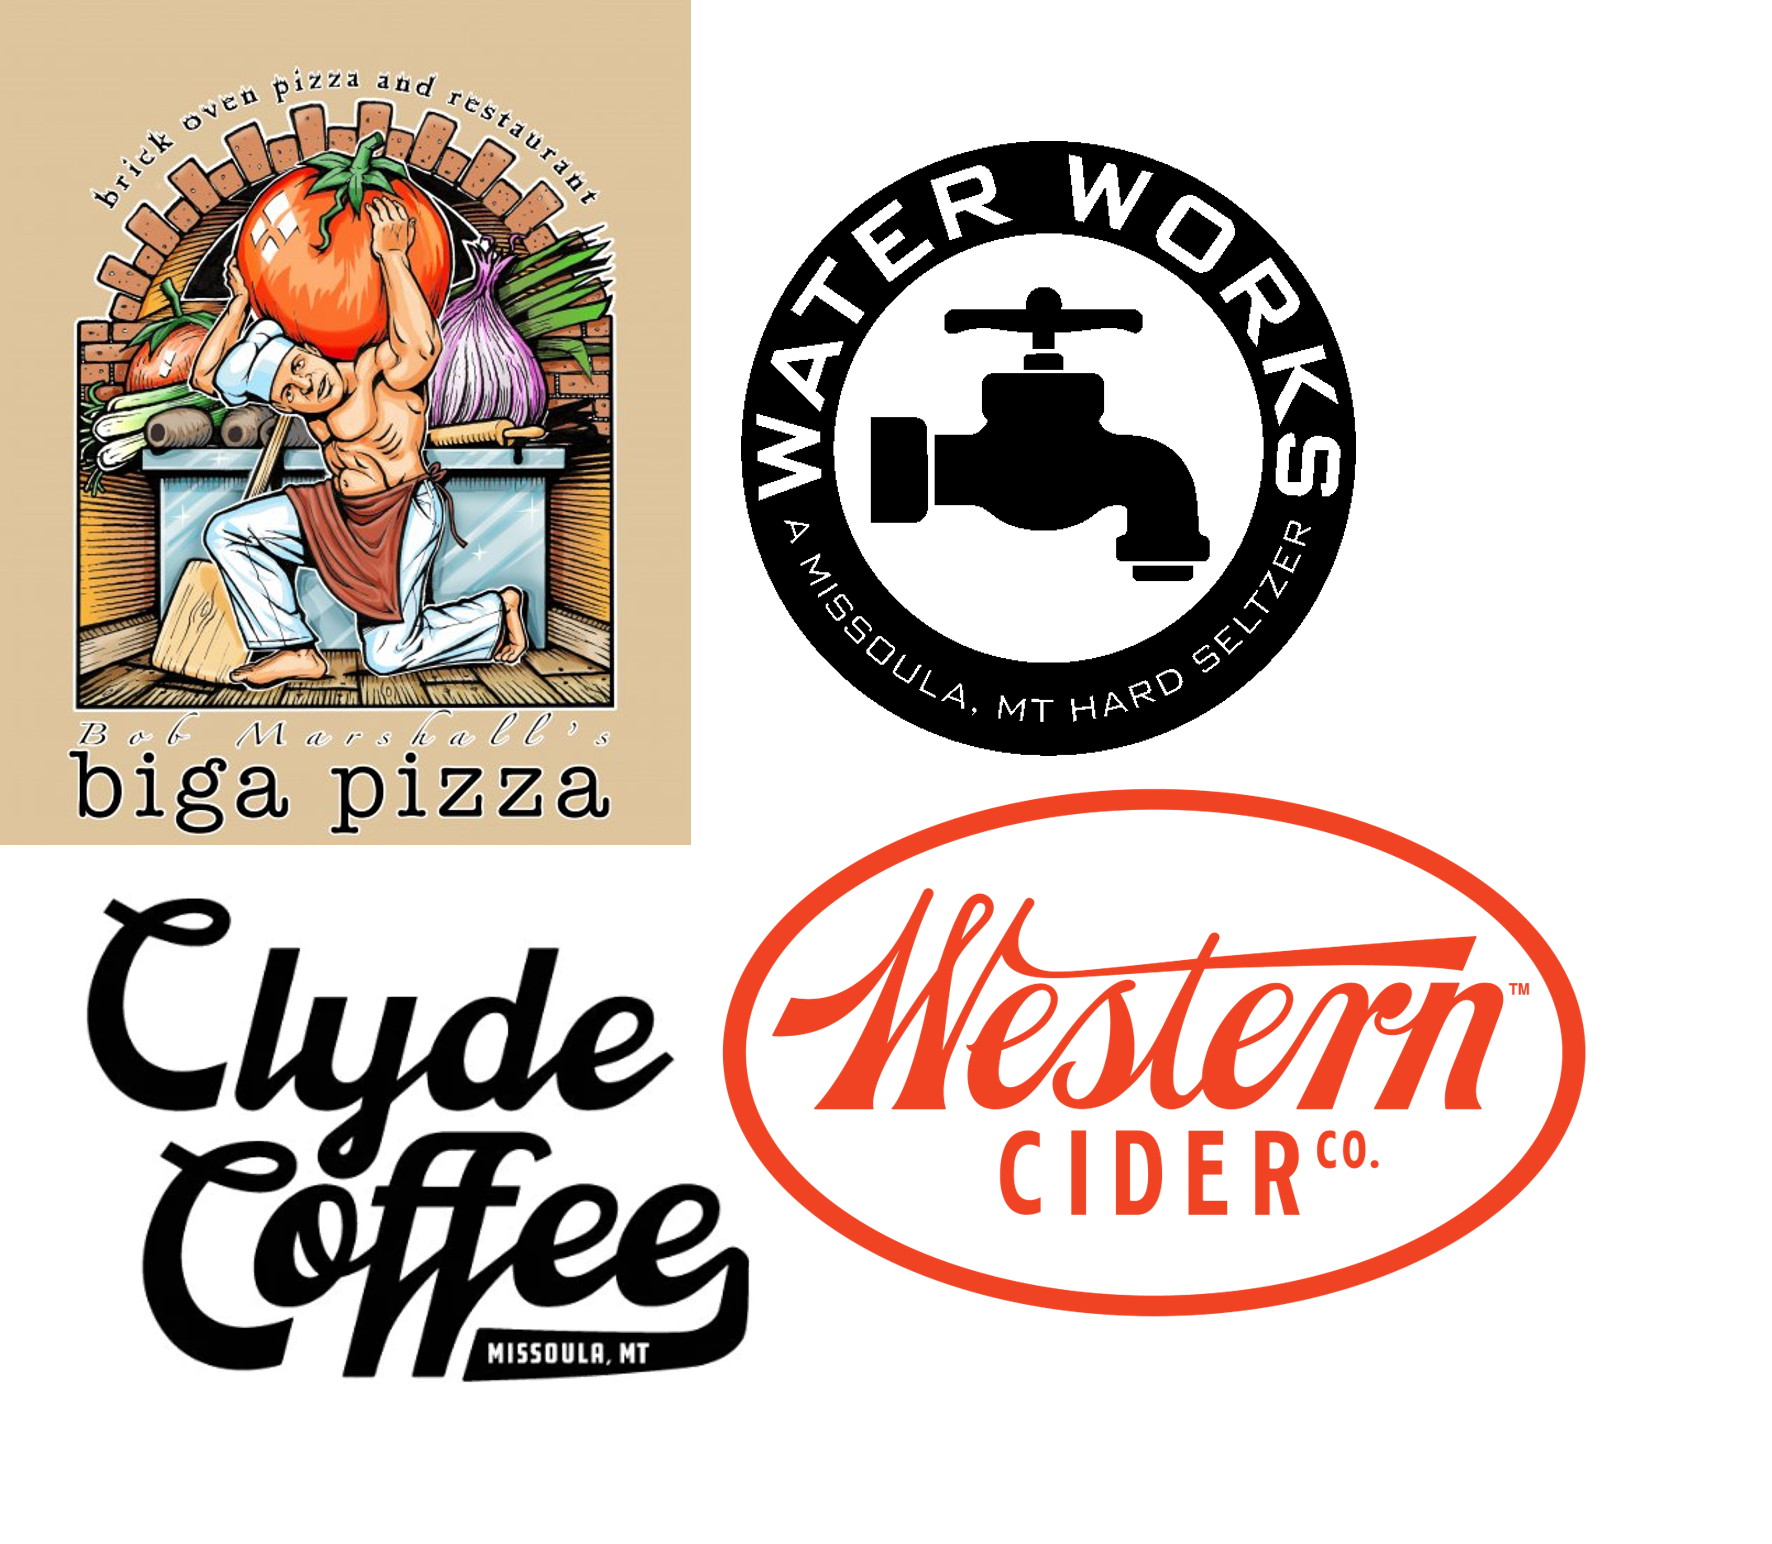 Biga Pizza, Clyde Coffee, WaterWorks, and Western Cider logos